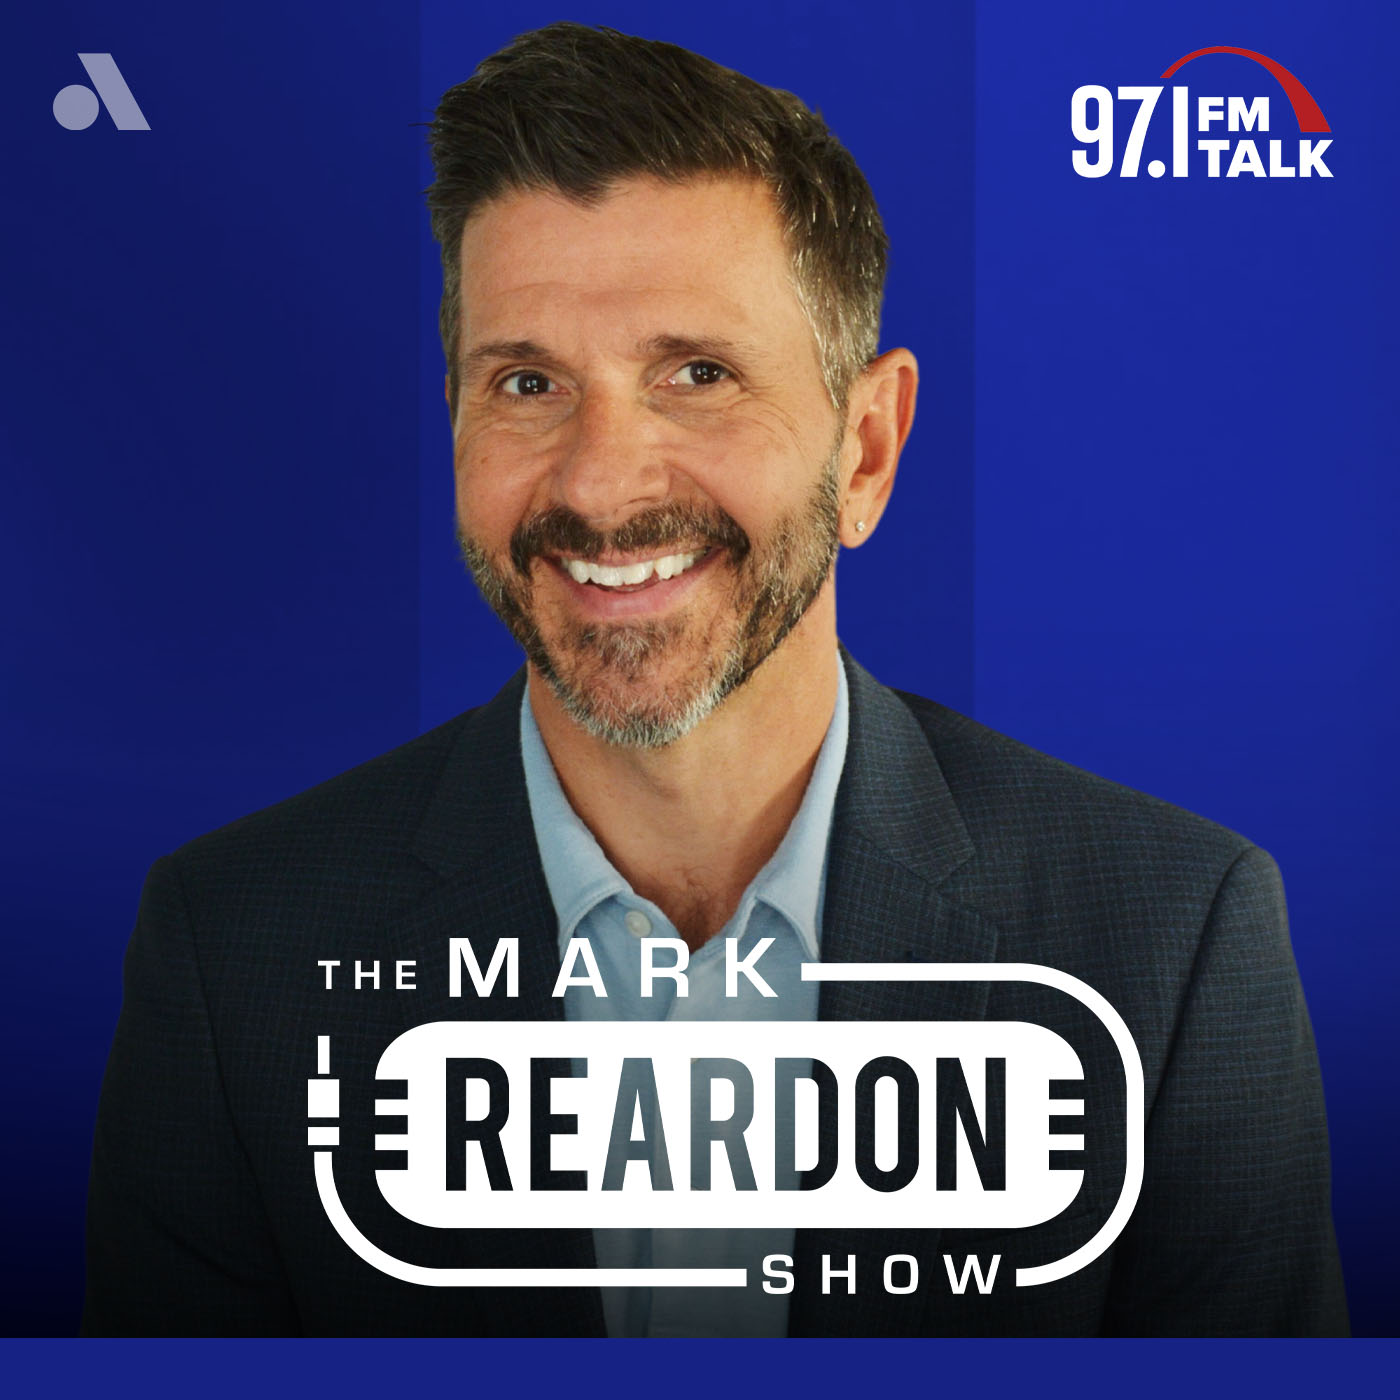 The Mark Reardon Show - October 22nd 2019 2PM Hour